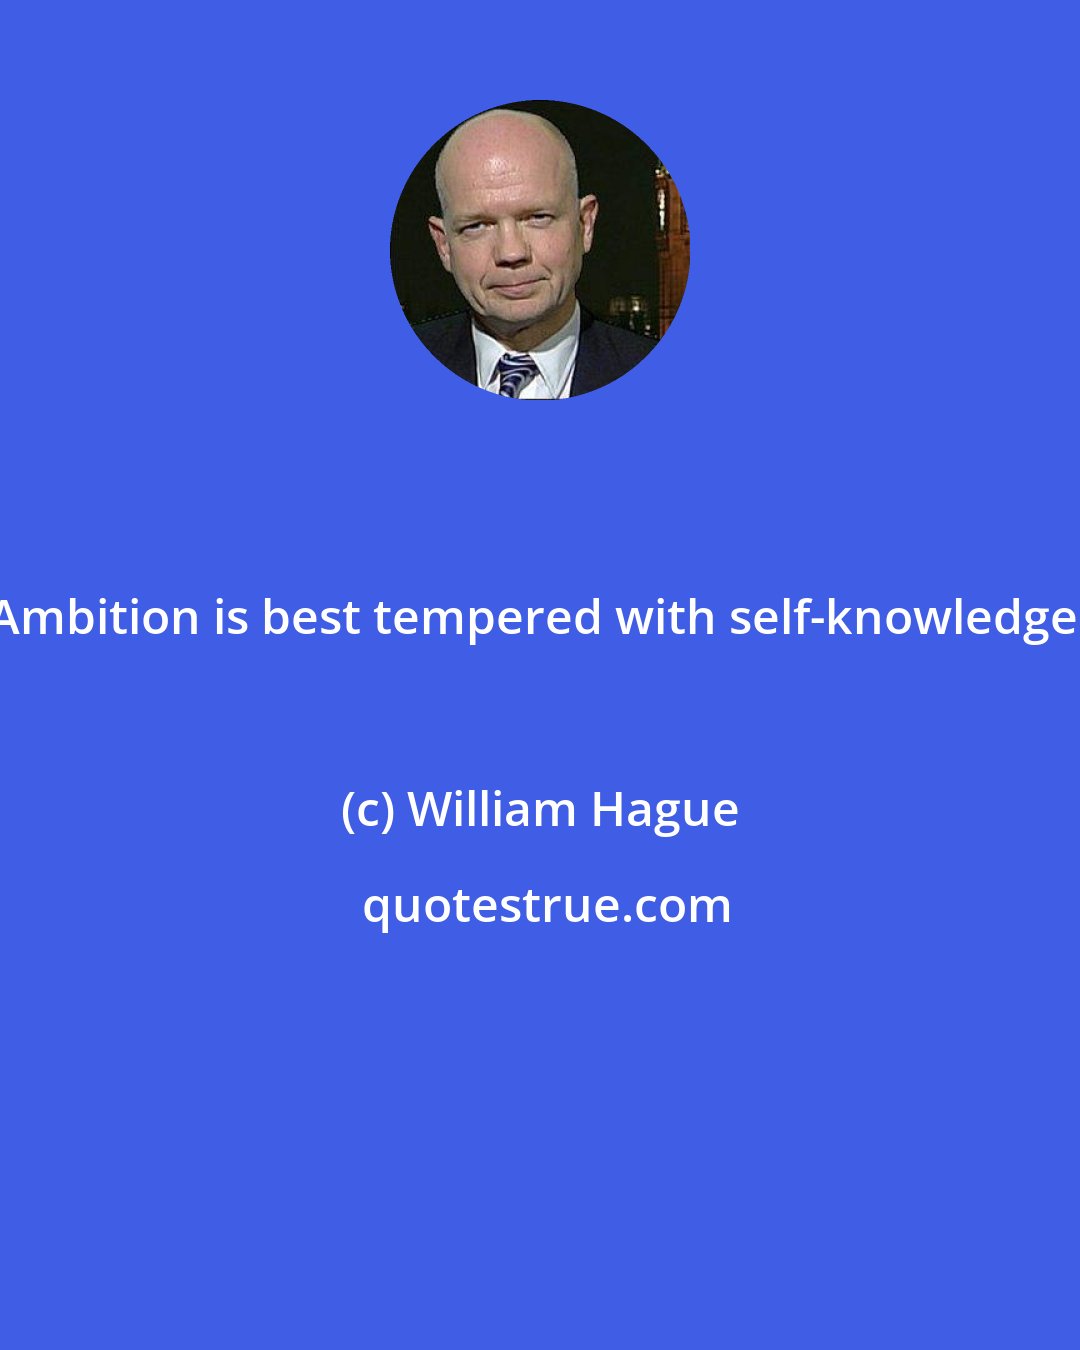 William Hague: Ambition is best tempered with self-knowledge!